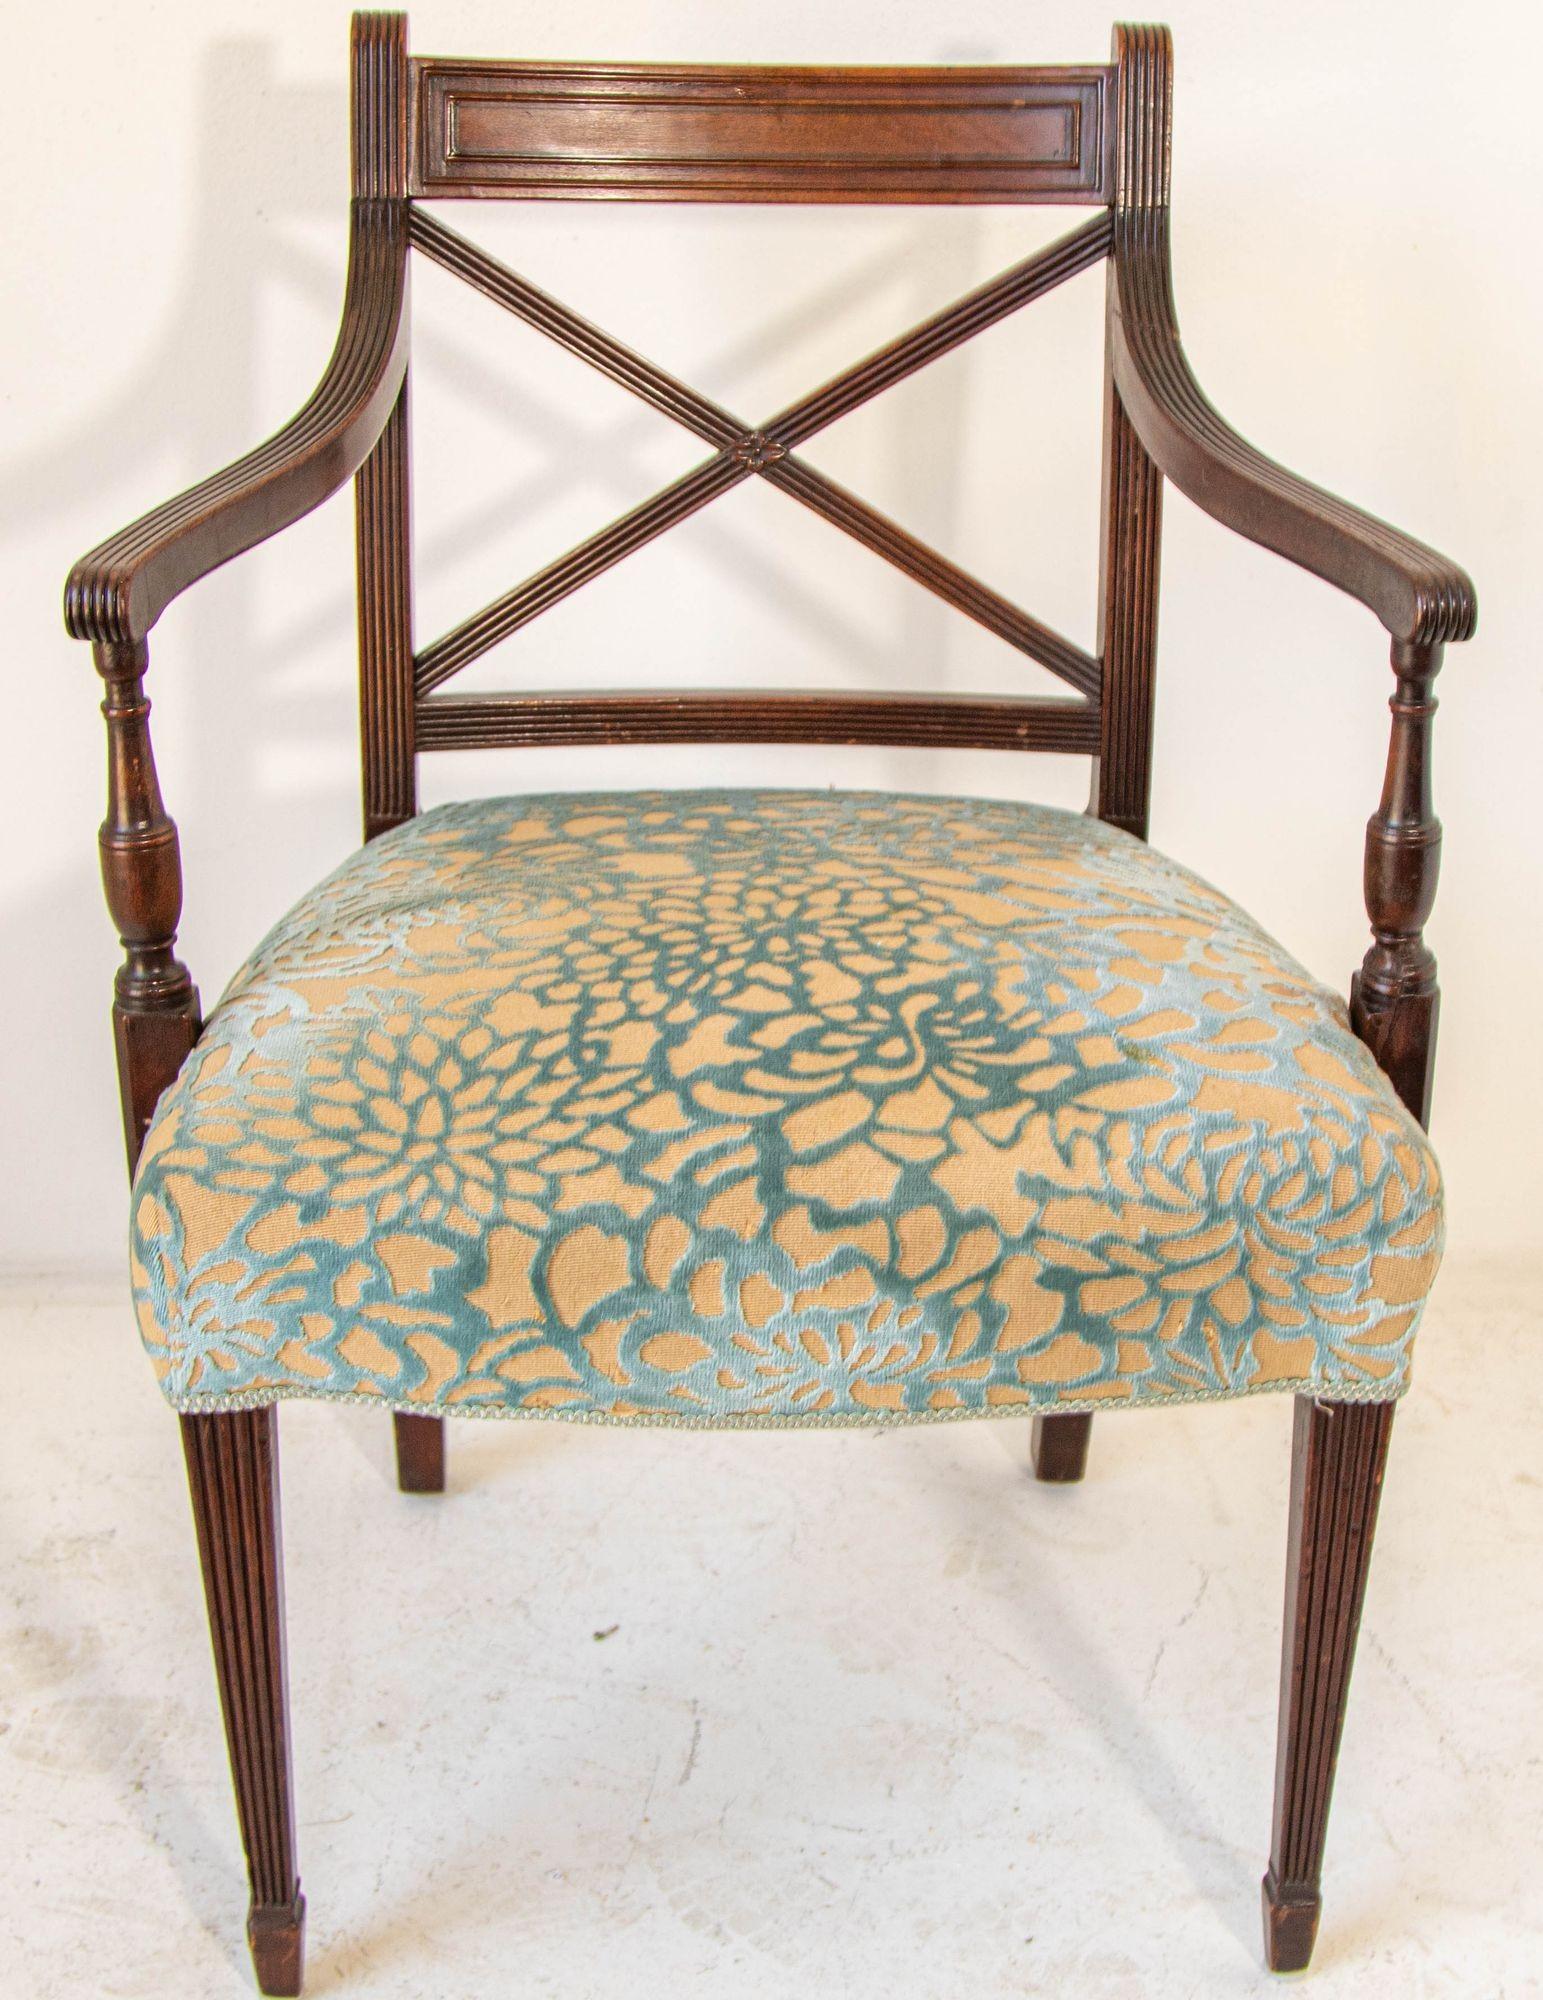 Vintage Hollywood Regency English Style Hand Carved Wood Side Chair. 
Side Chair in walnut stained solid wood, wooden rolled arms and flared back legs.
Cushion seat with foamed base for comfort and style. 
This accent arm chair body surround is